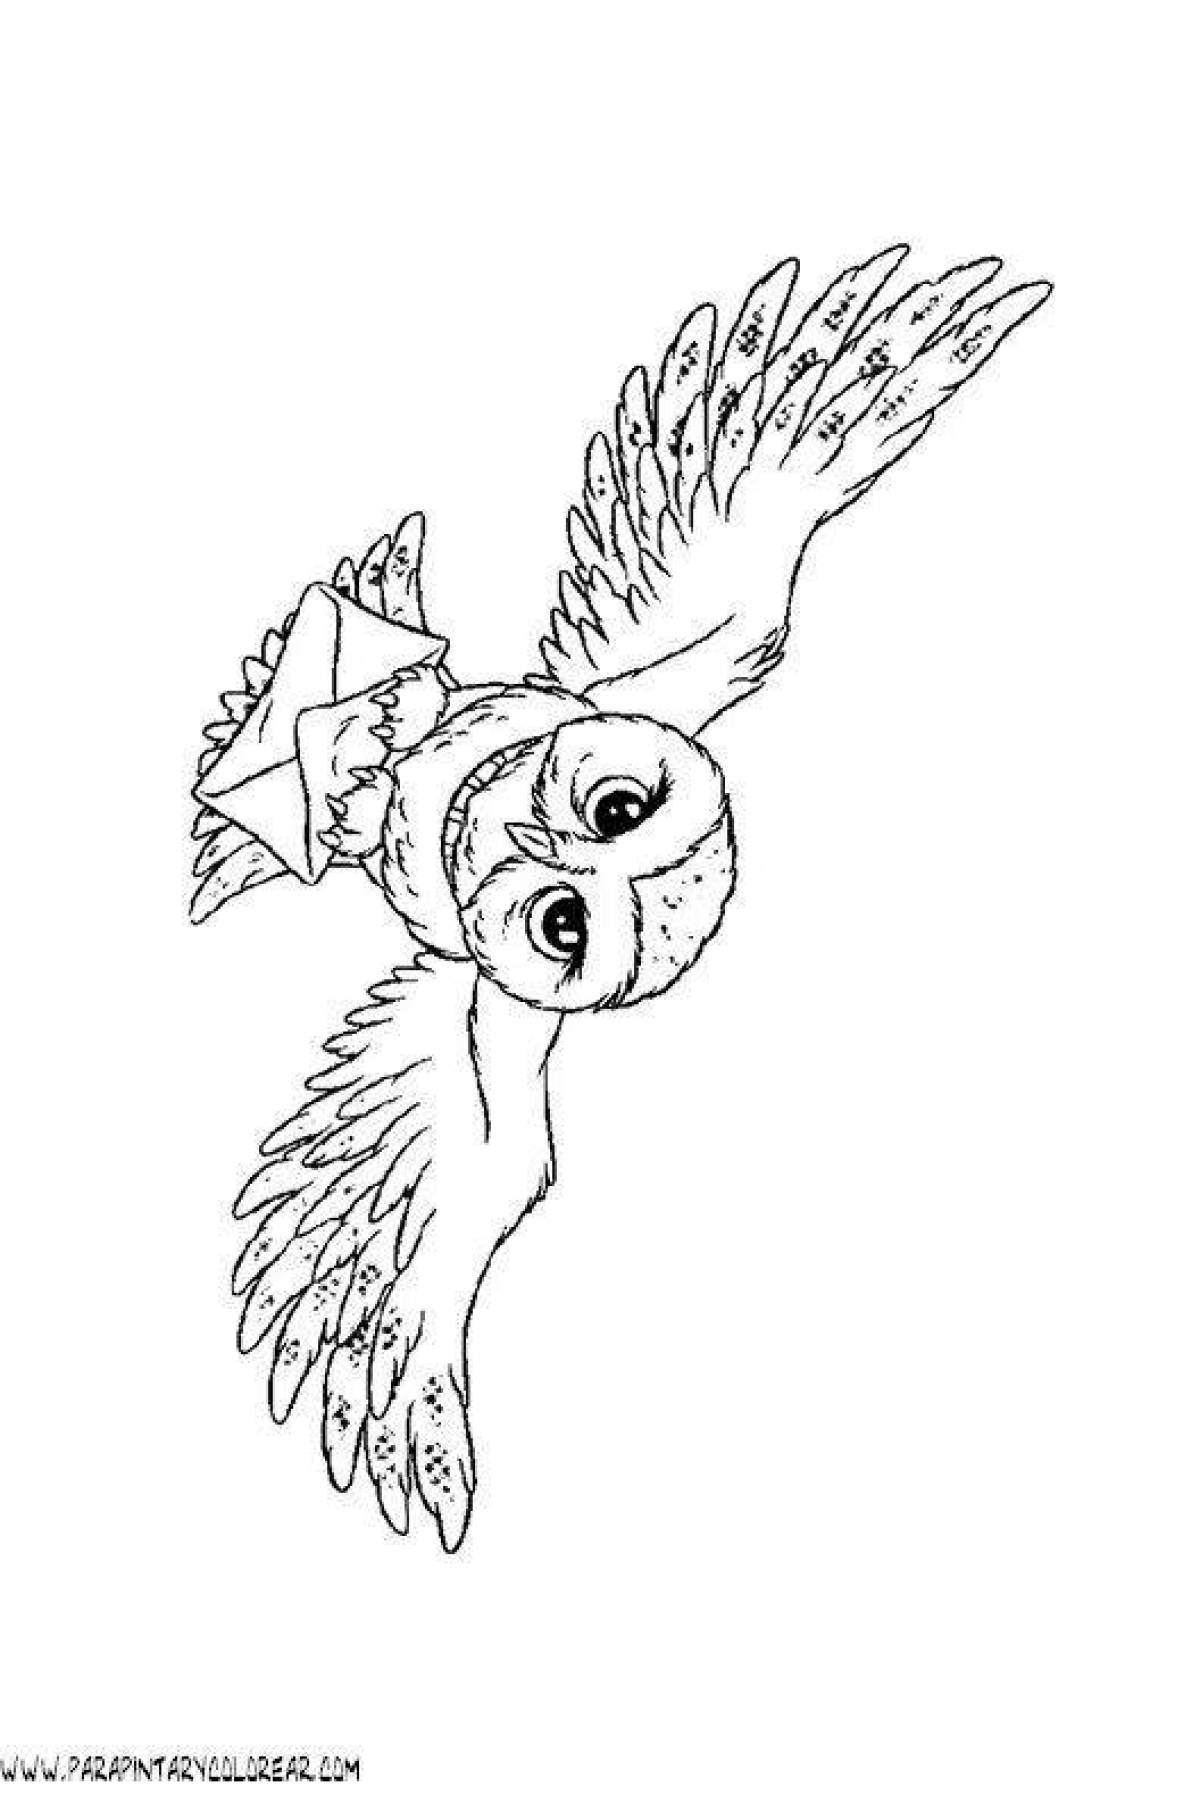 Awesome harry potter owl coloring page